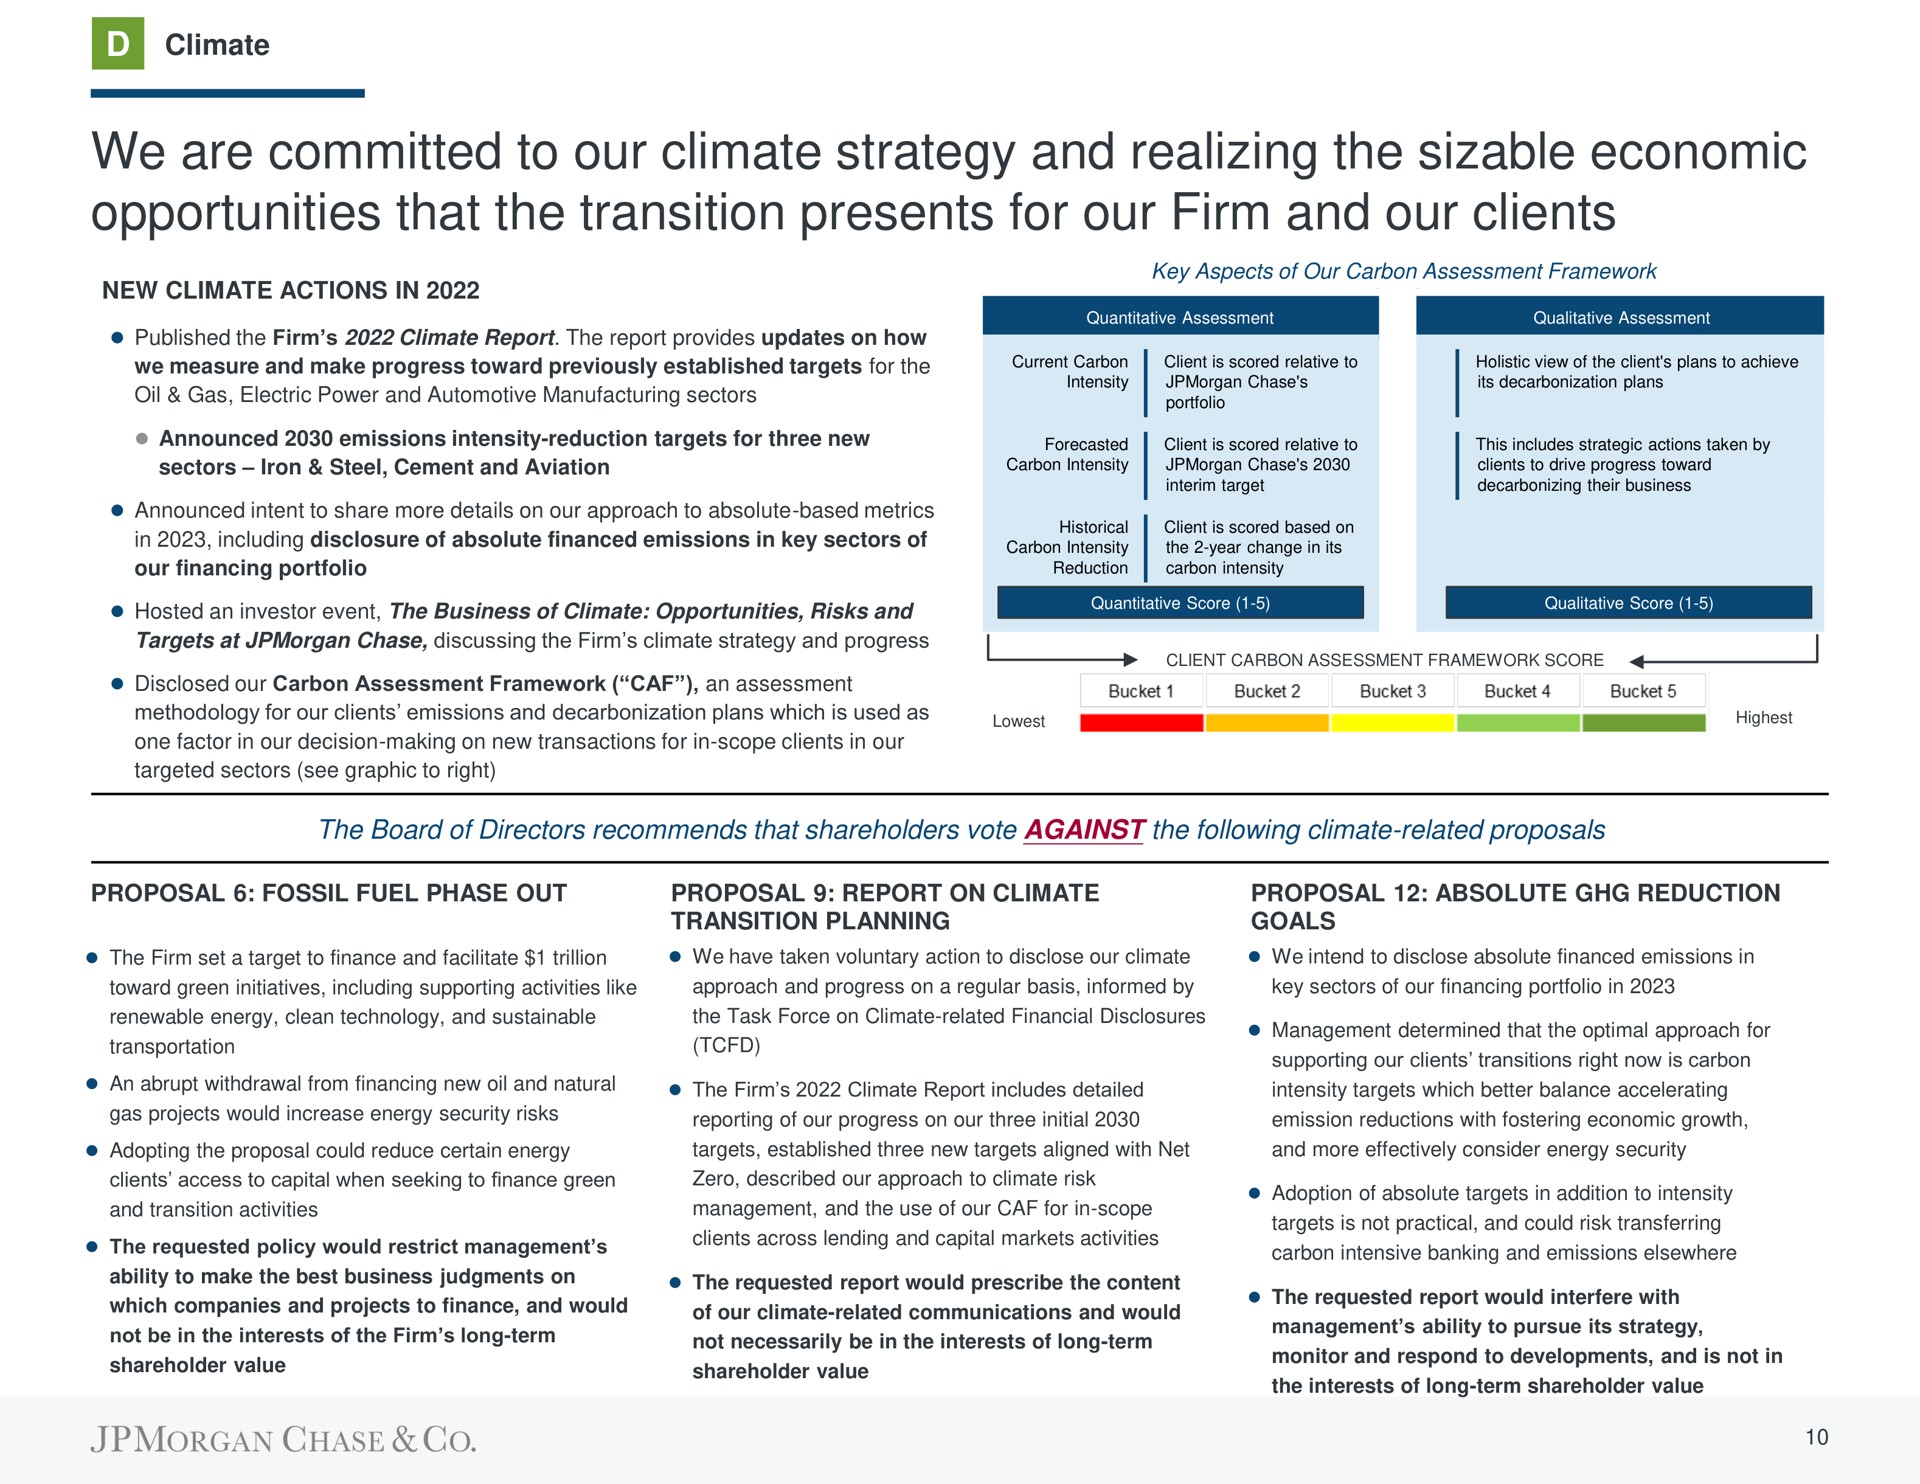 we are committed to our climate strategy and realizing the sizable economic opportunities that the transition presents for our firm and our clients | J.P.Morgan